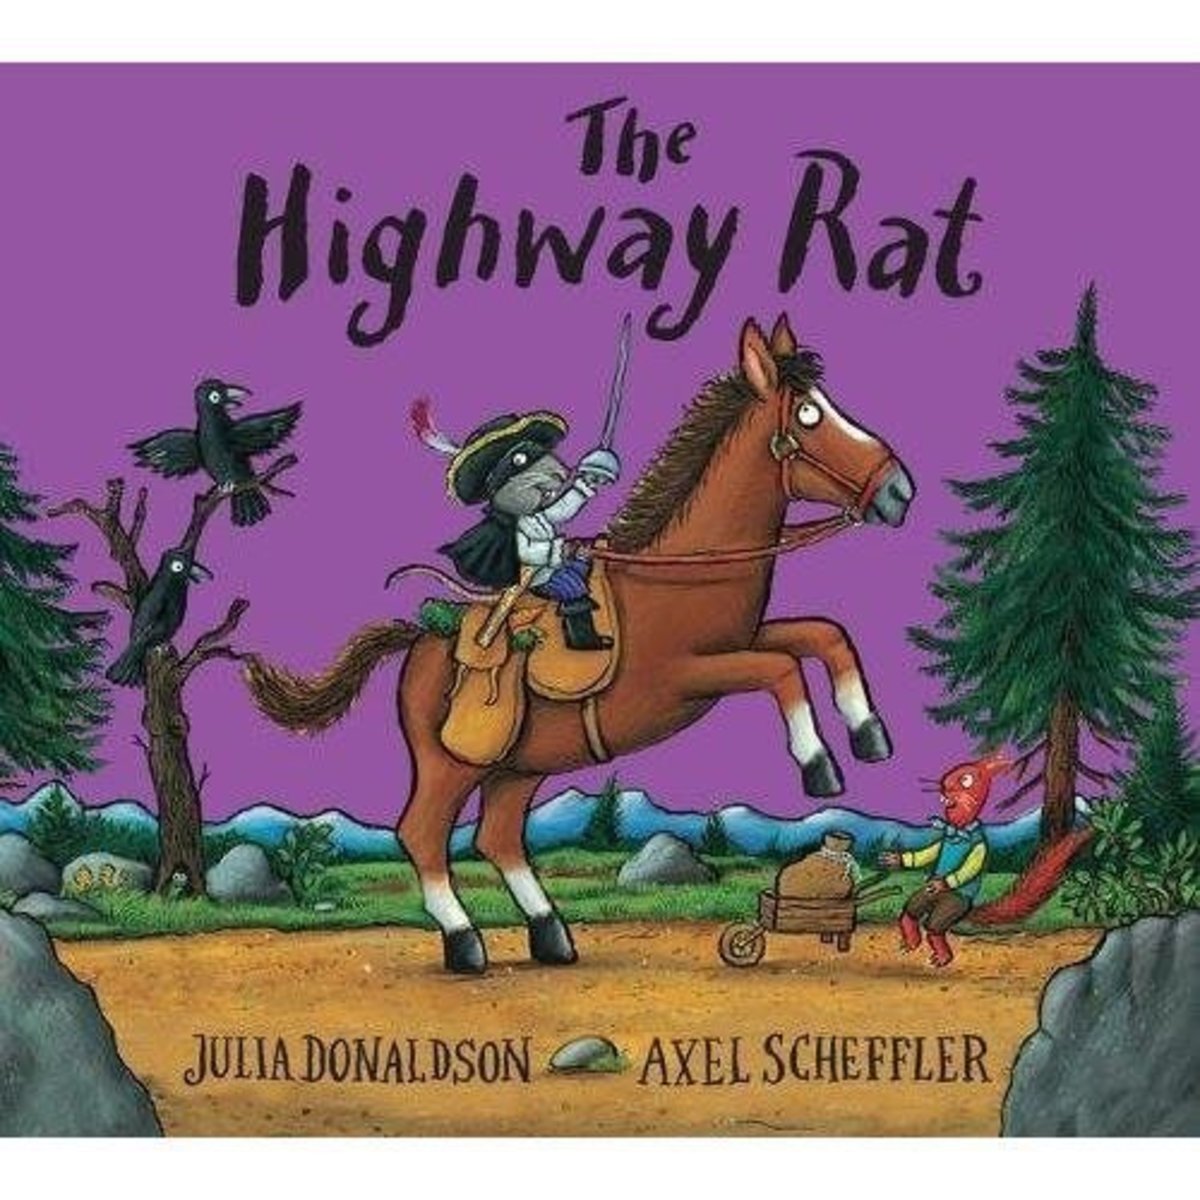 childrens-book-review-the-highway-rat